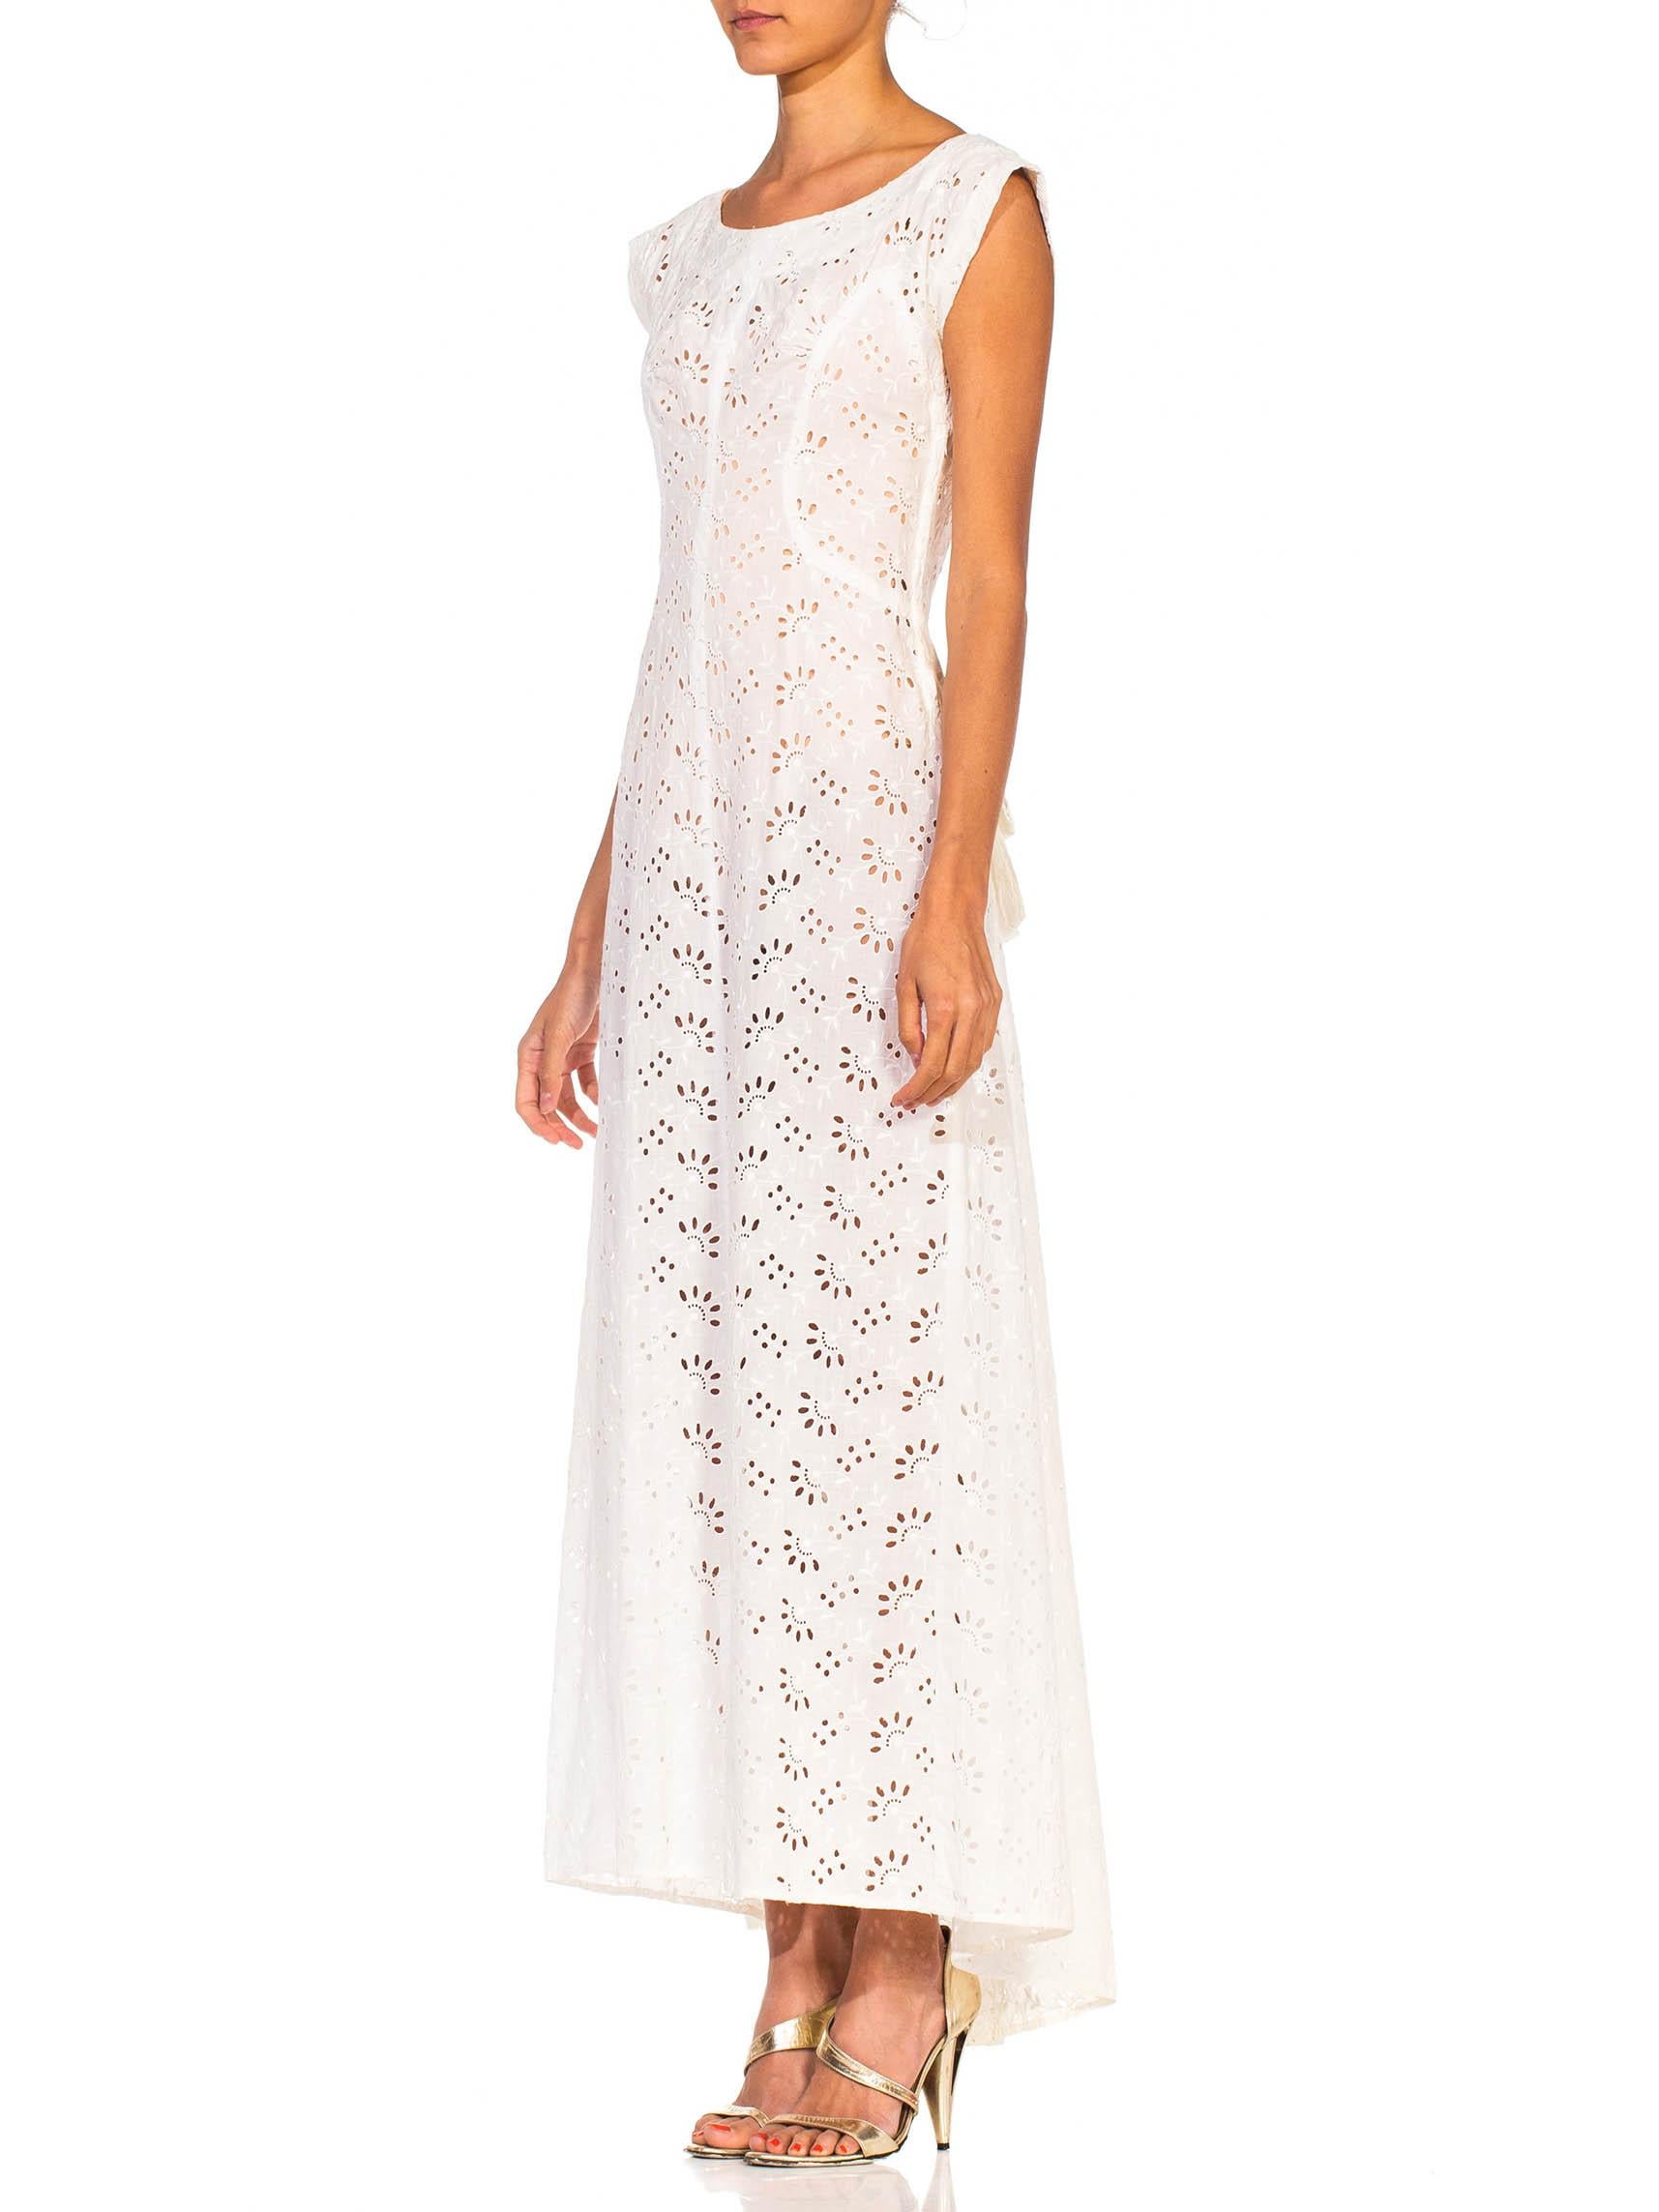 1930S White Cotton Eyelet Lace Summer Lawn Party Dress With Mini Bustle For Sale 2